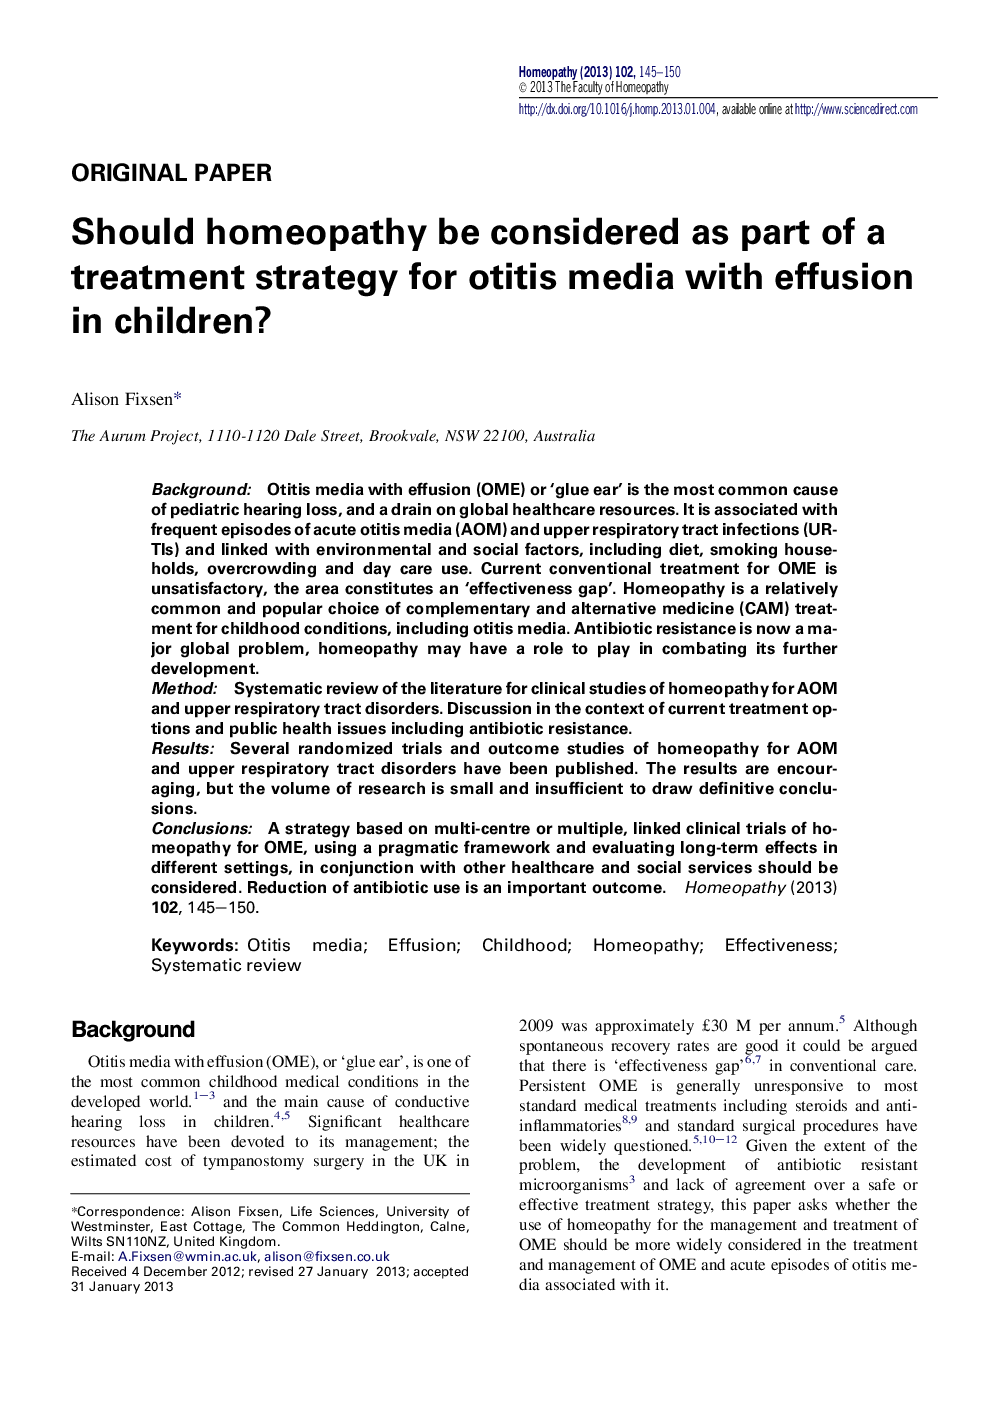 Should homeopathy be considered as part of a treatment strategy for otitis media with effusion in children?